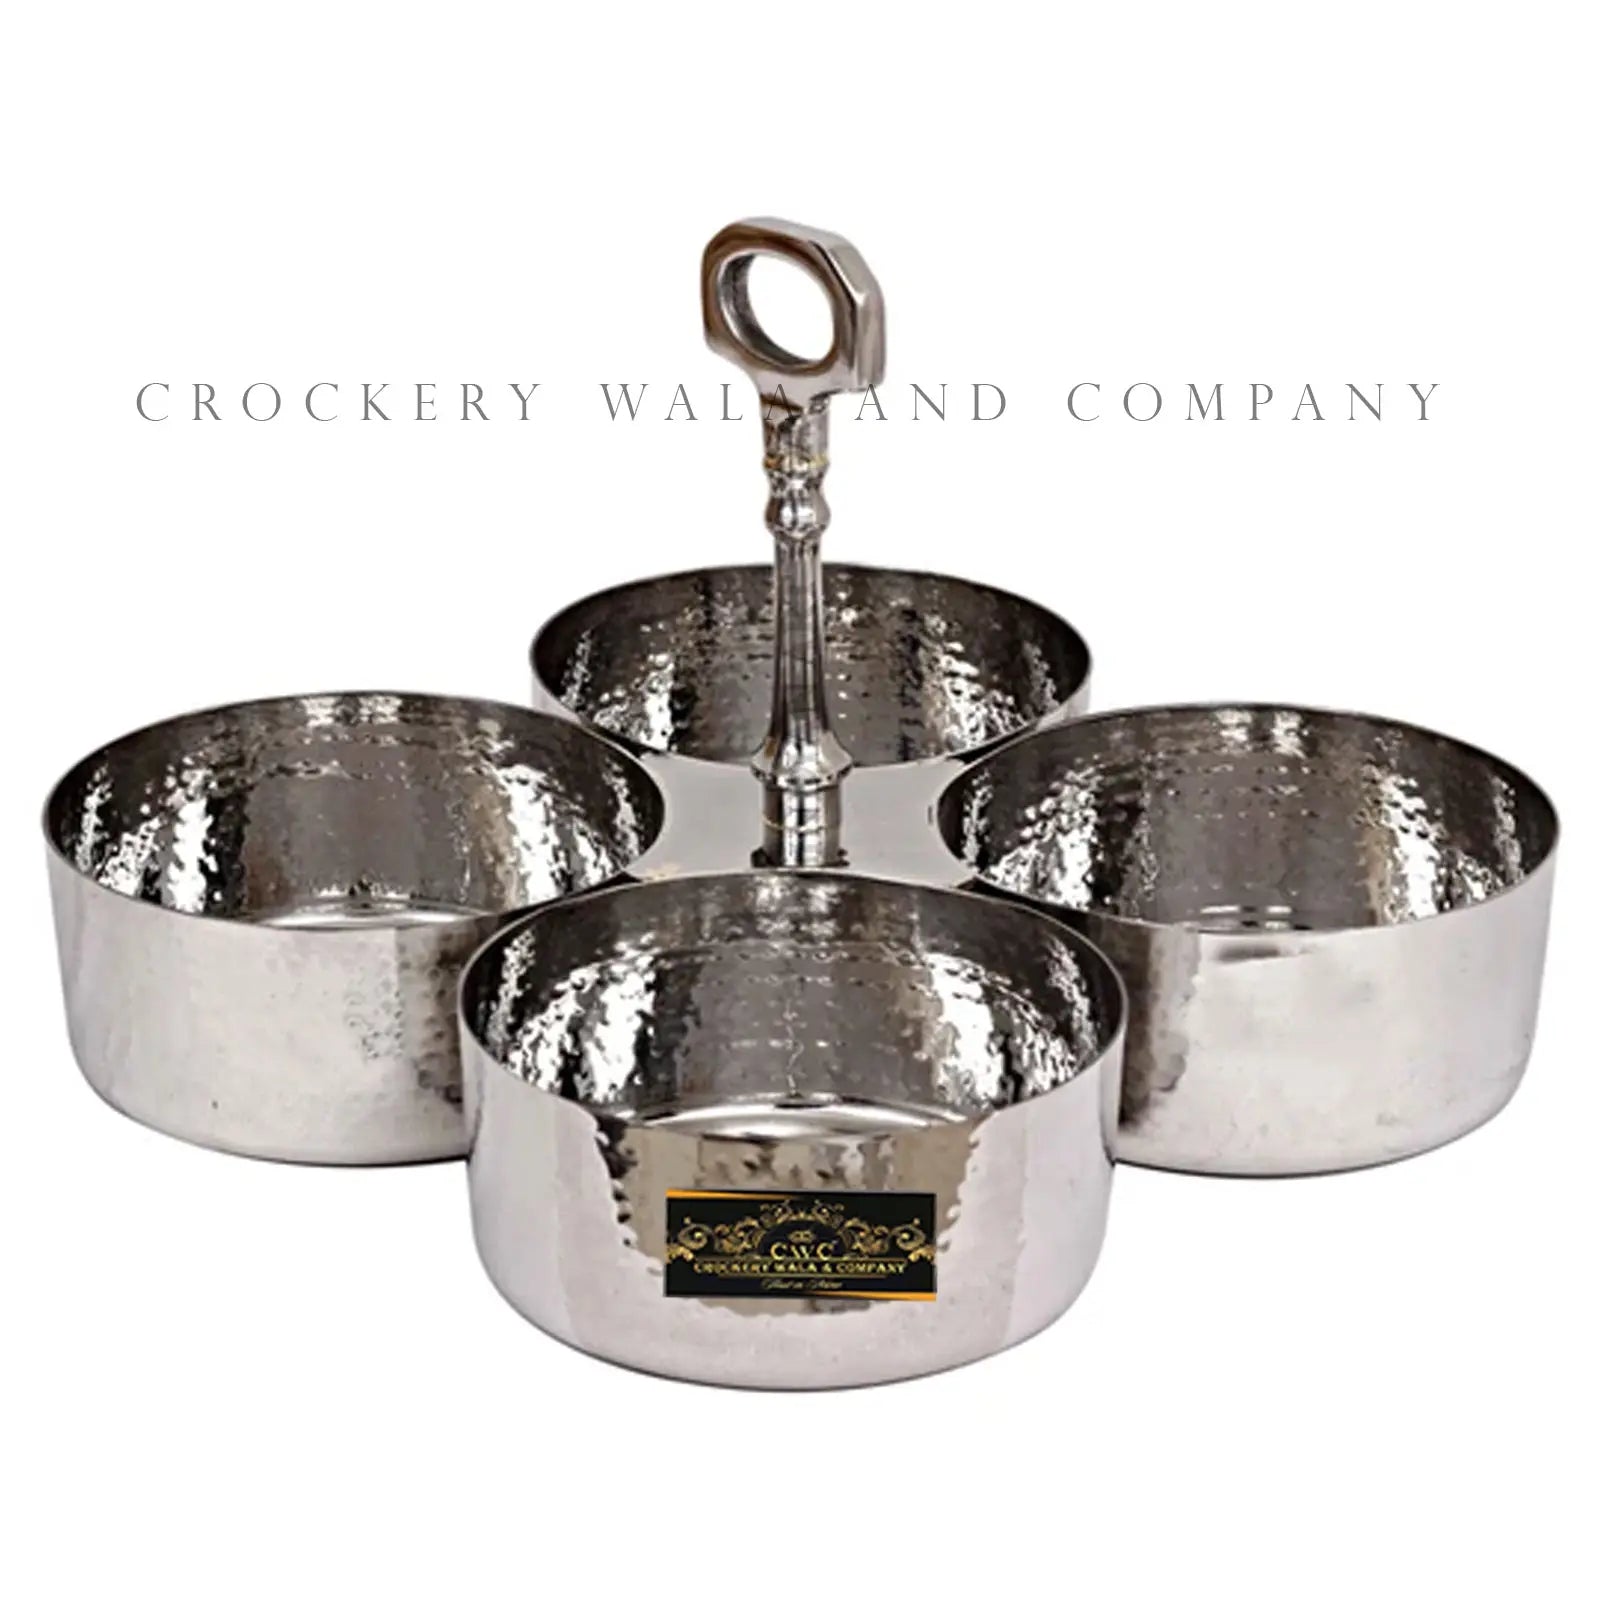 Crockery Wala And Company Stainless Steel Pickle Bowl Set Hammered Design Condimental Pickle Set With Handle 4 Containers - CROCKERY WALA AND COMPANY 